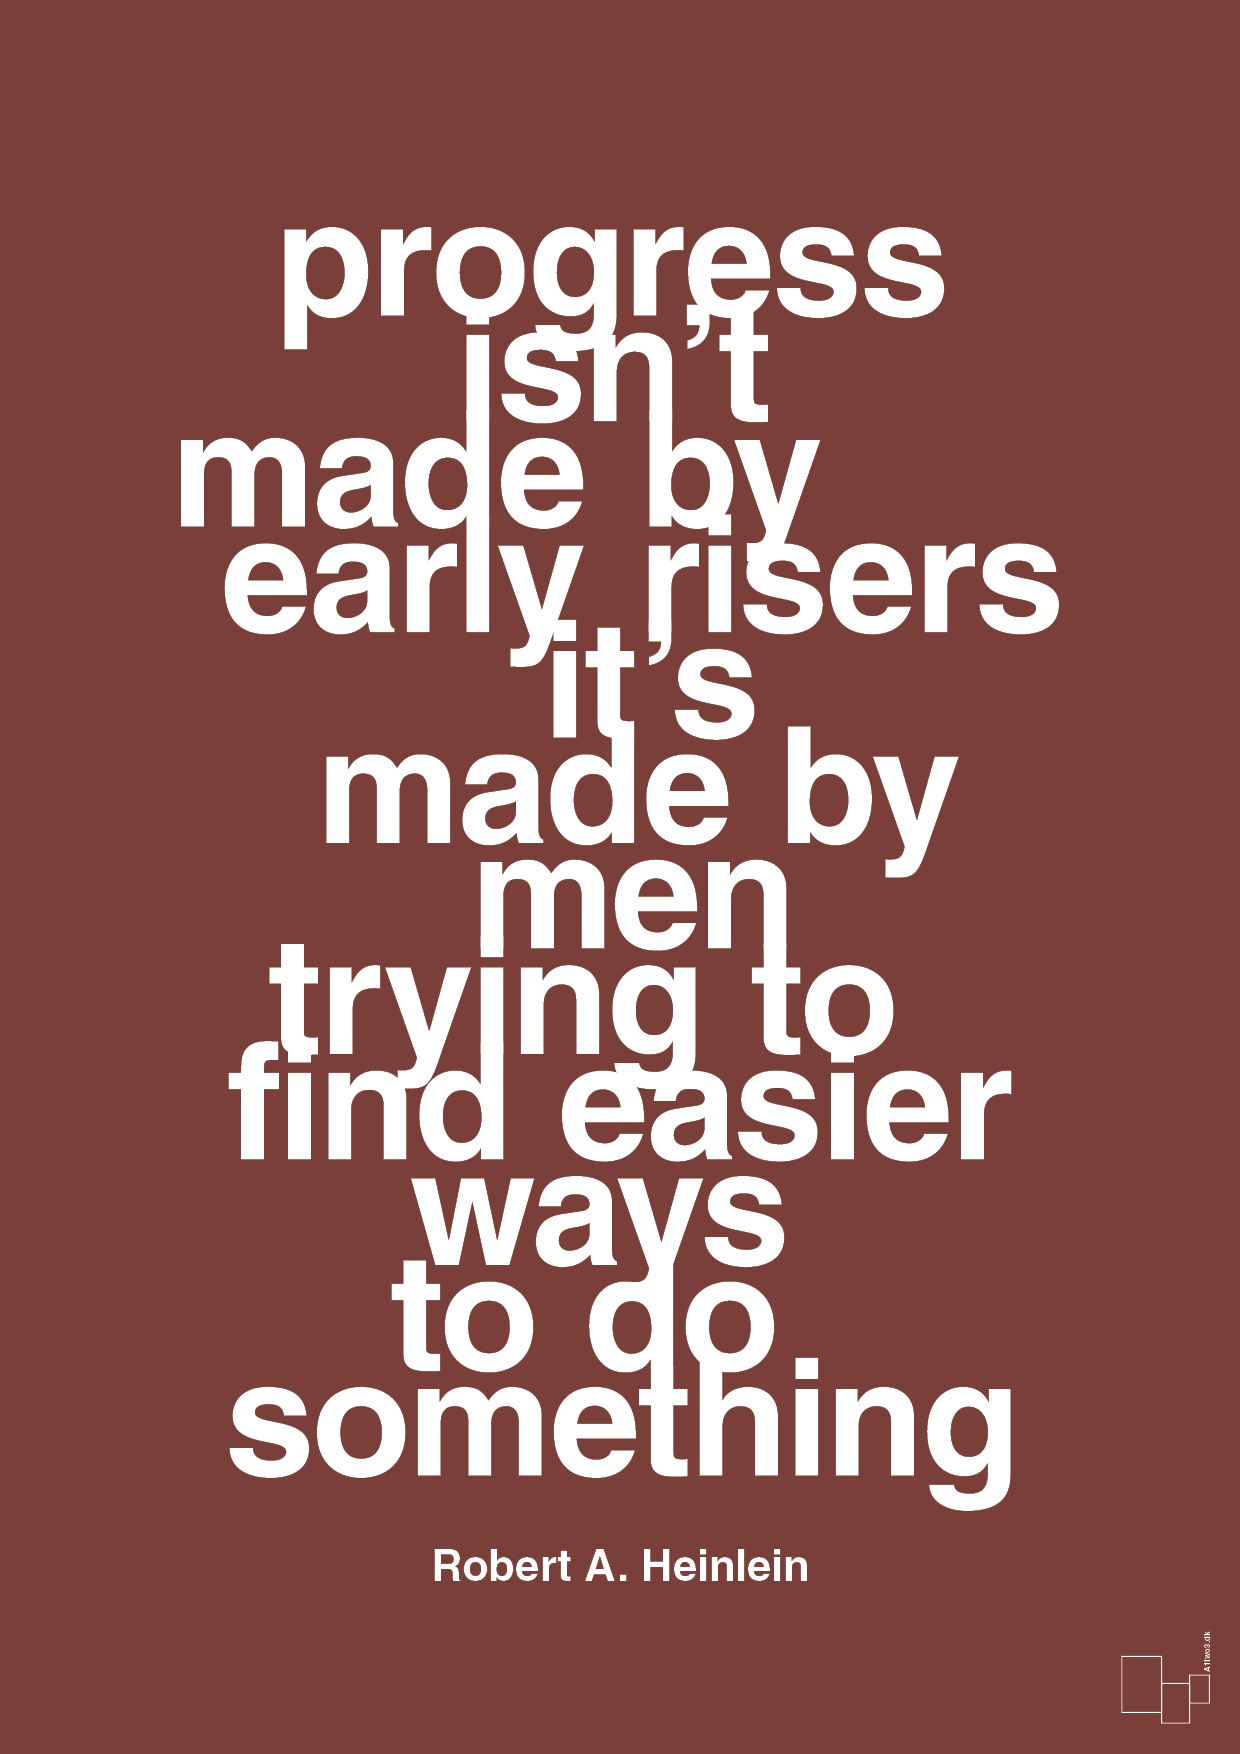 progress isnt made by early risers - Plakat med Citater i Red Pepper